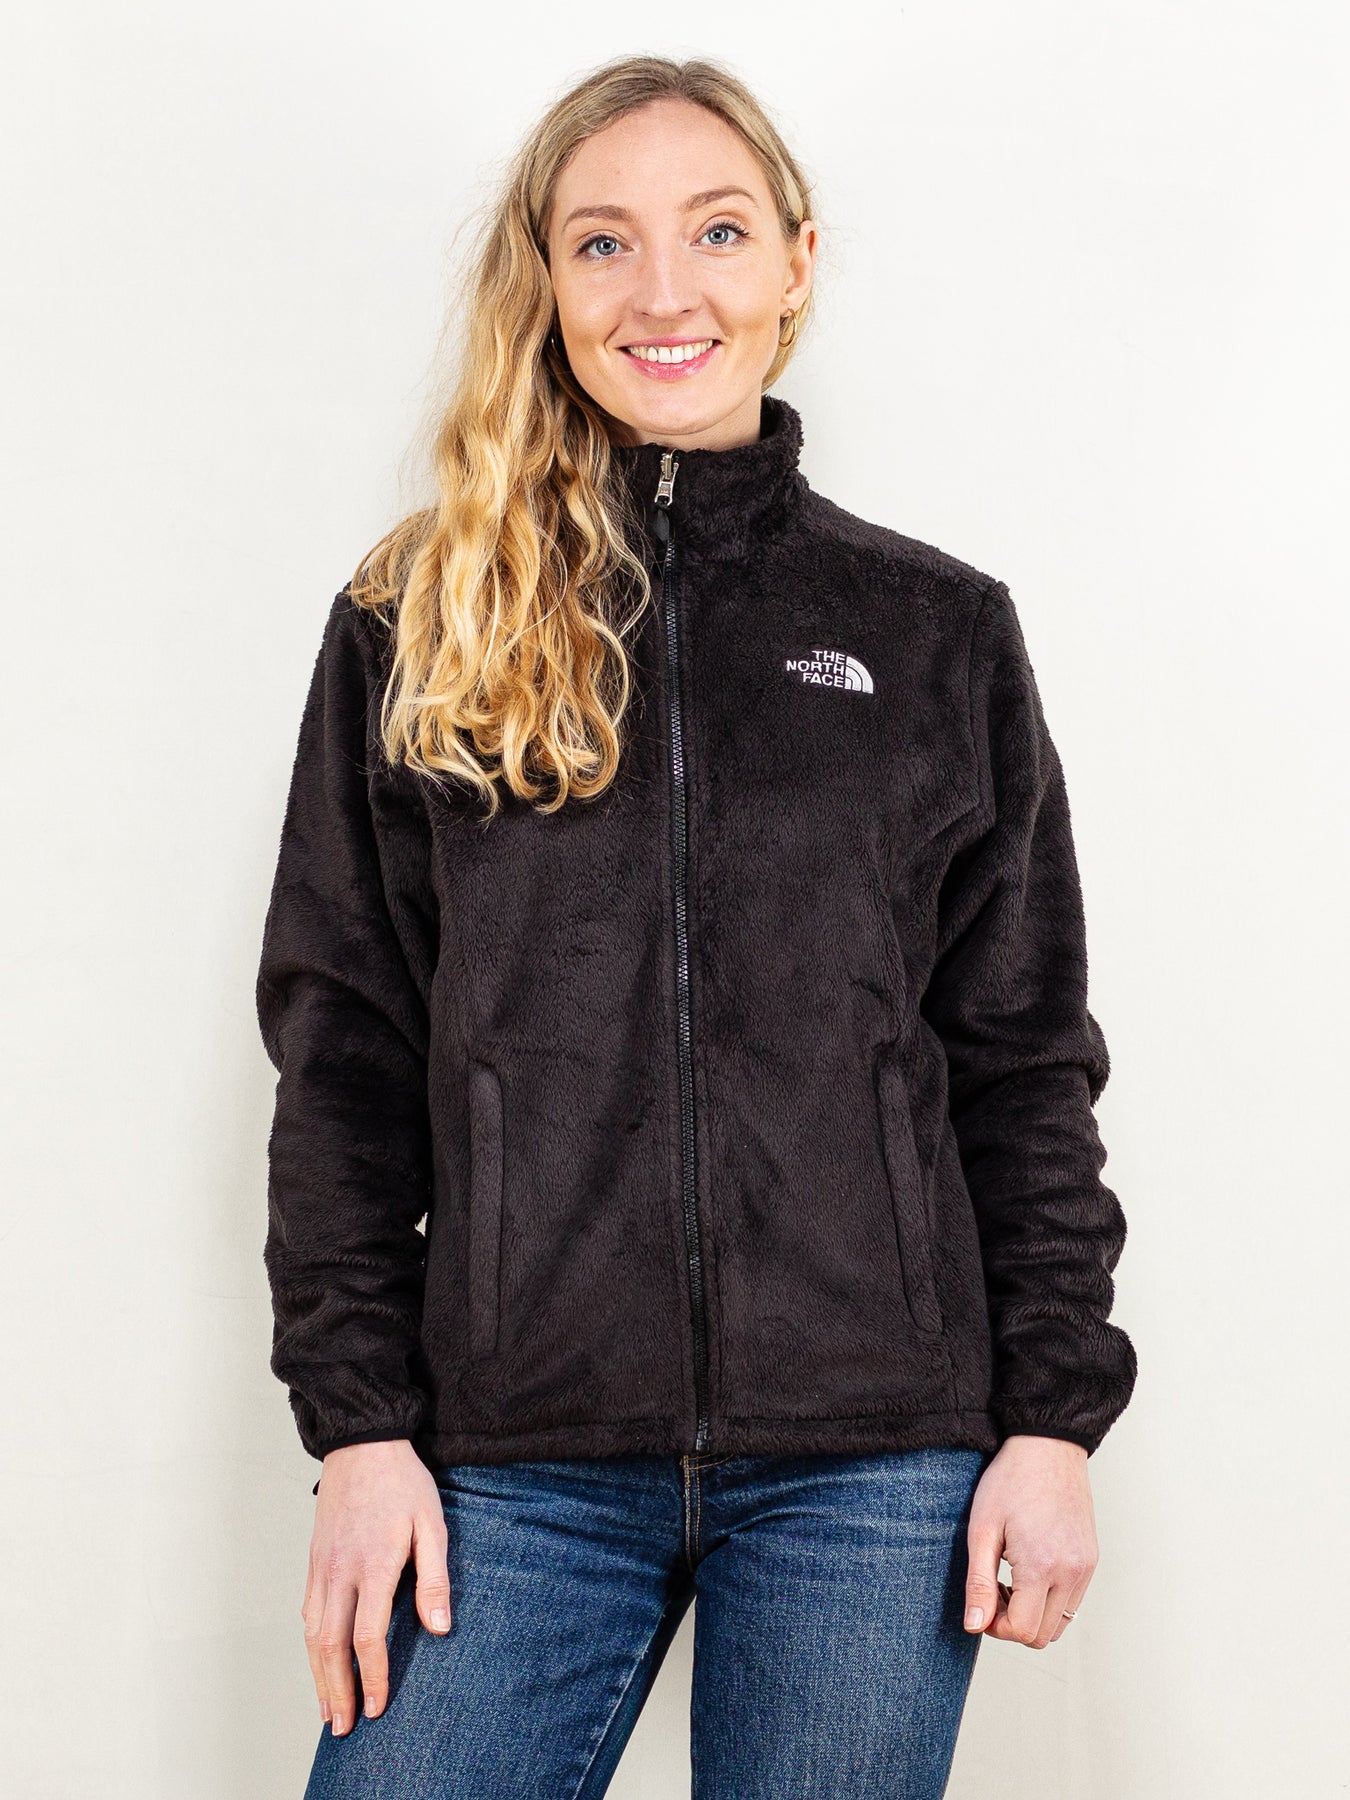 The North Face Osito 2 Fleece Jacket - Women's - Clothing